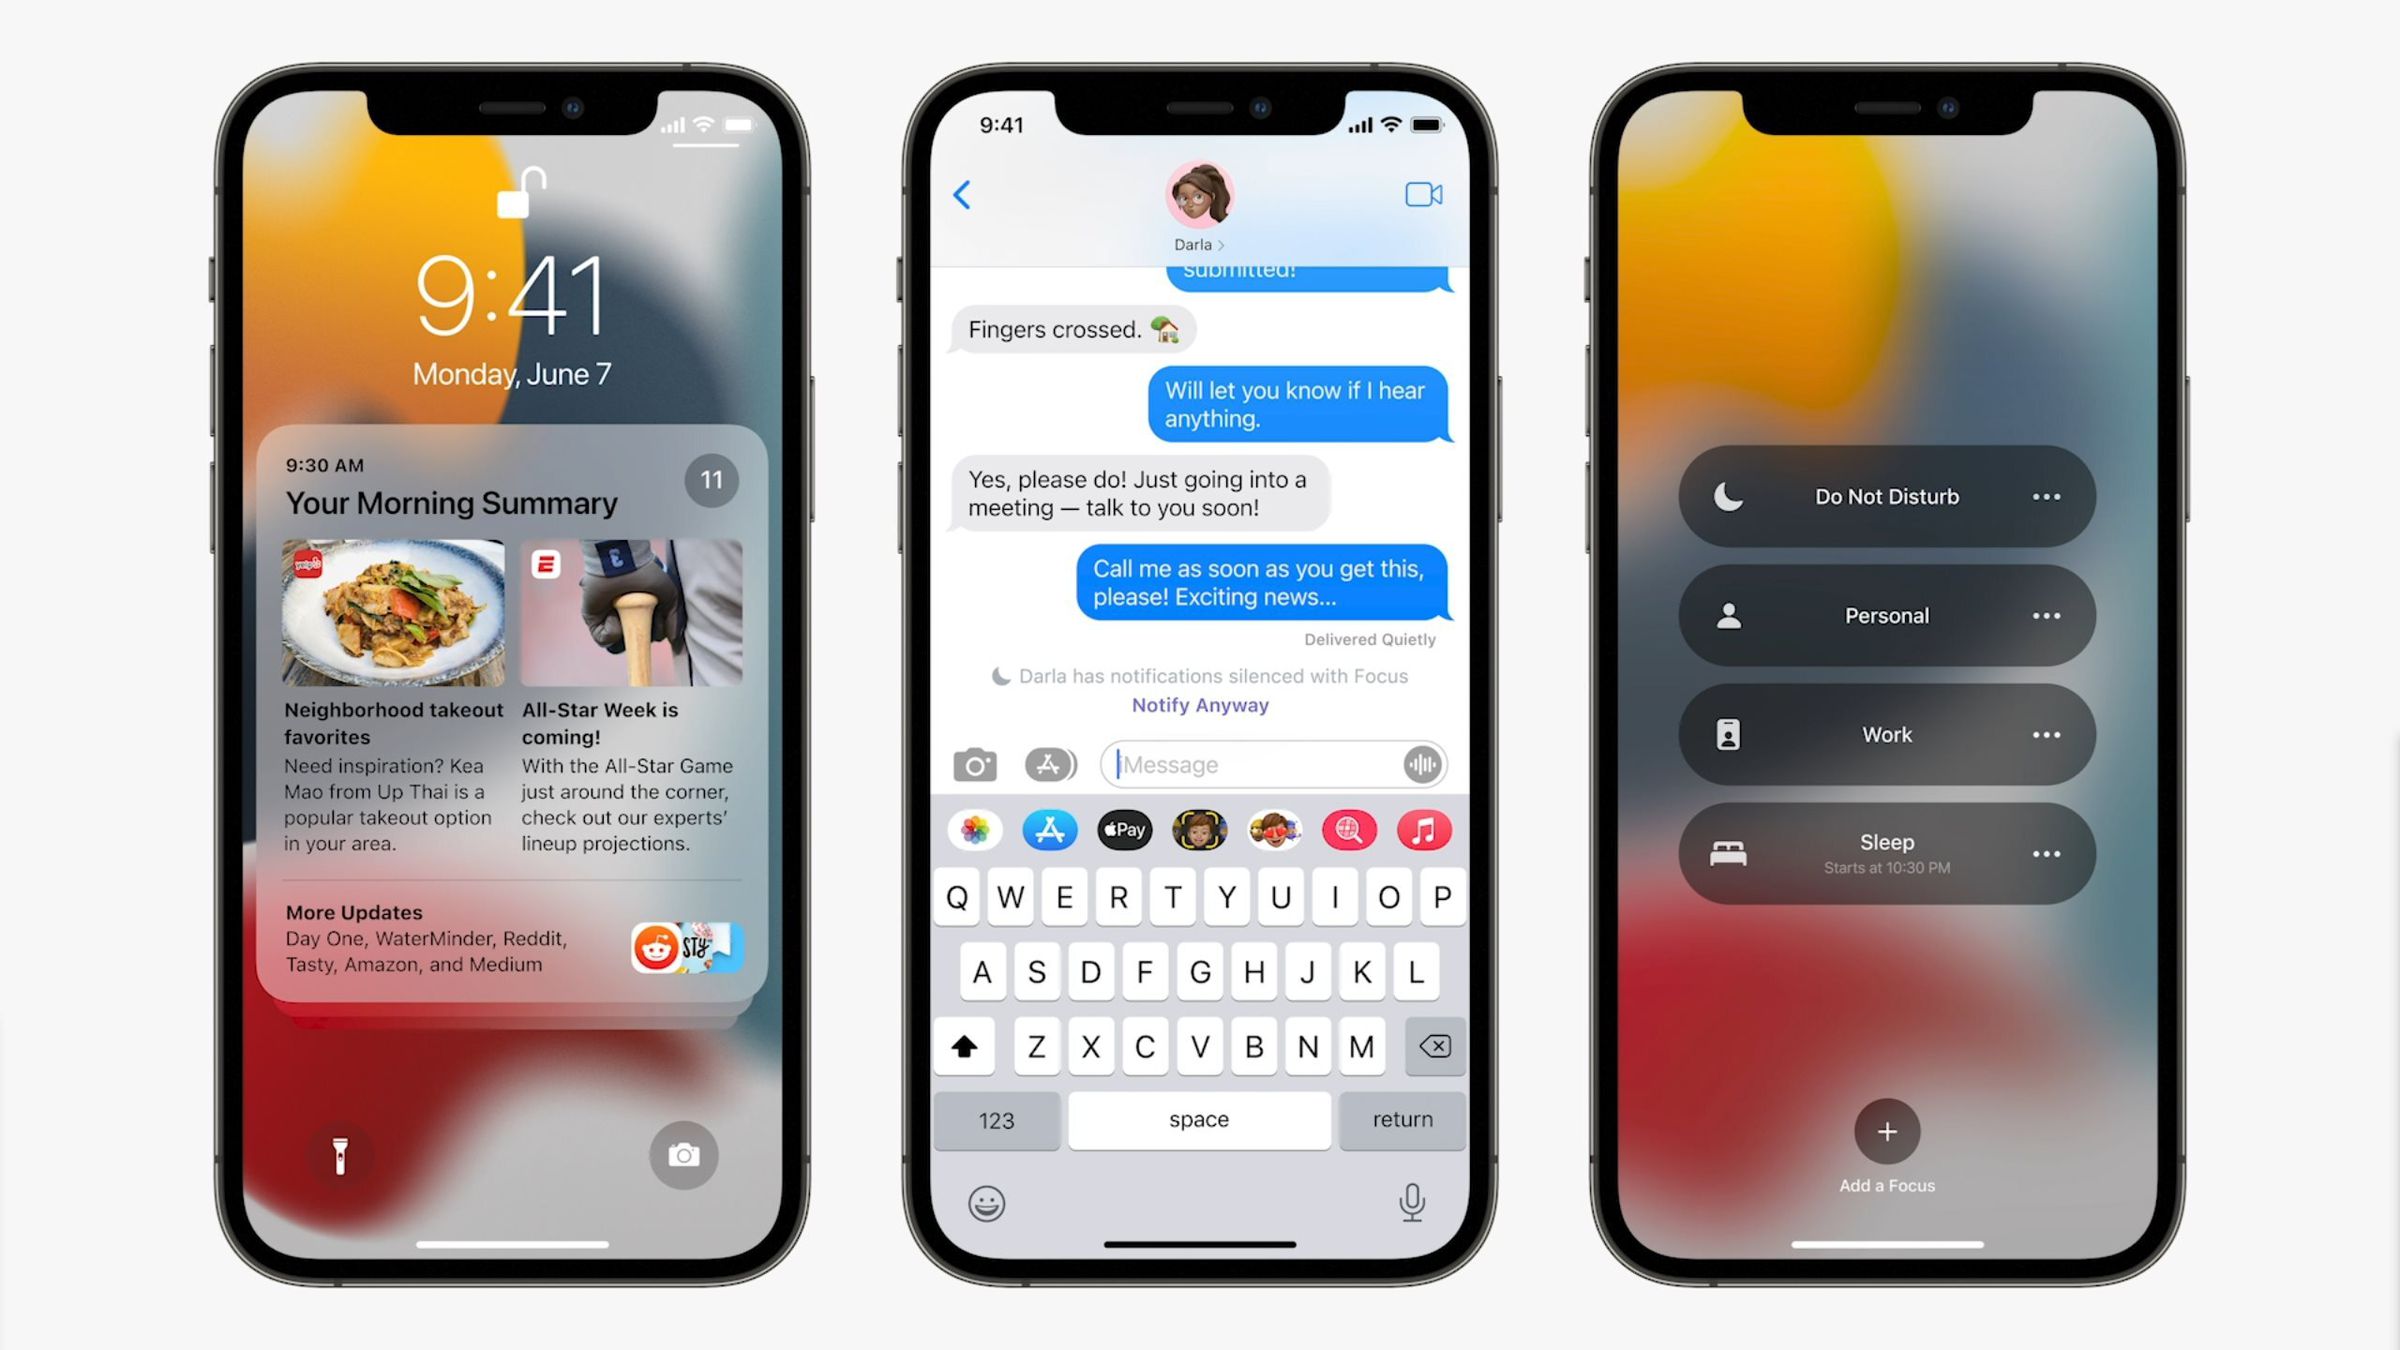 iOS 15 offers more custom controls over notifications, like batch summaries and Focus modes.